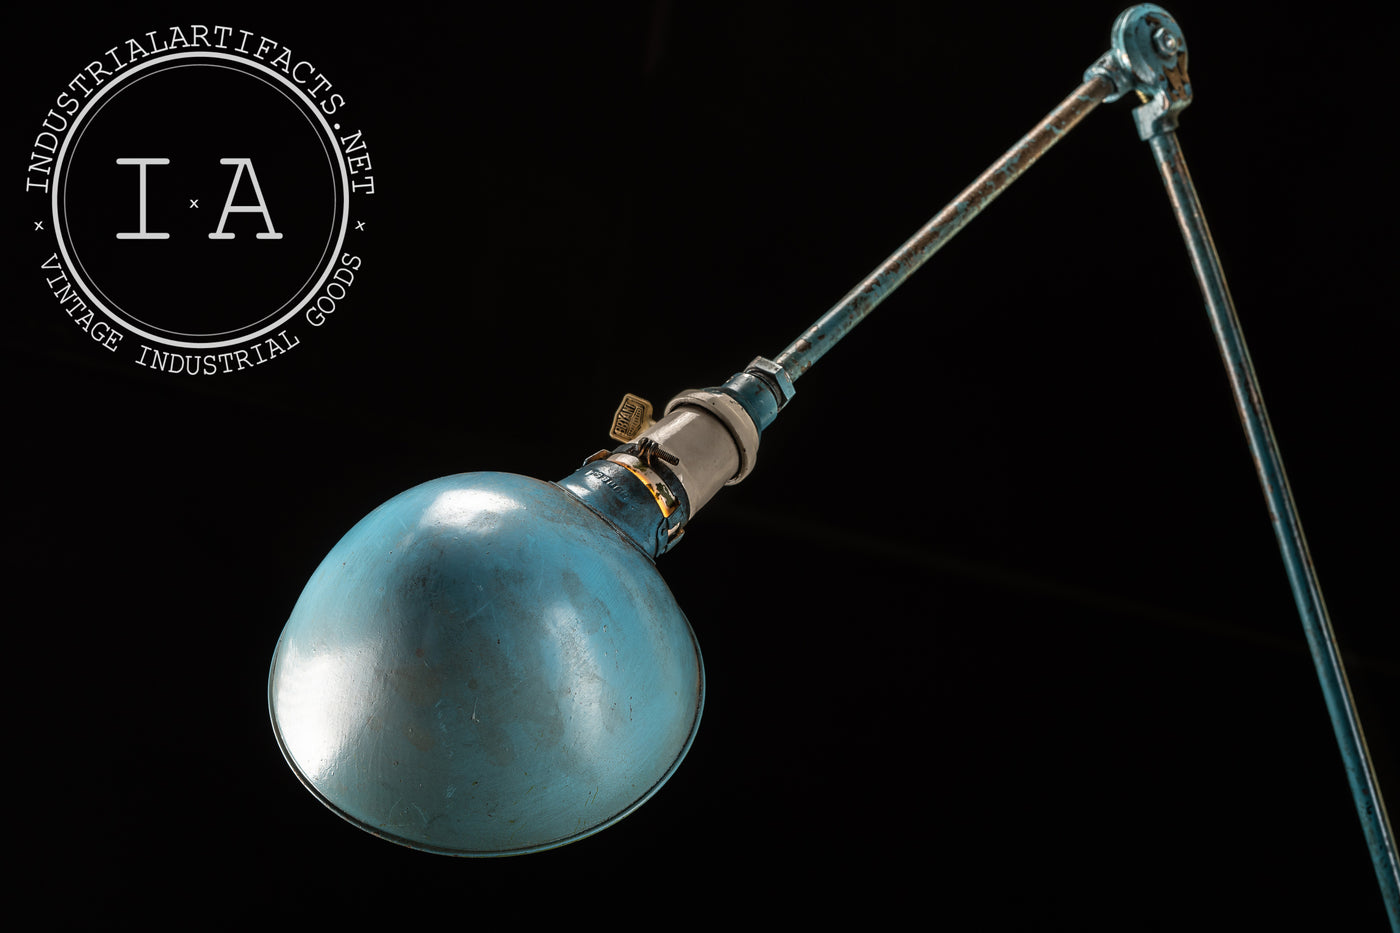 Vintage Industrial Articulated Lamp in Blue